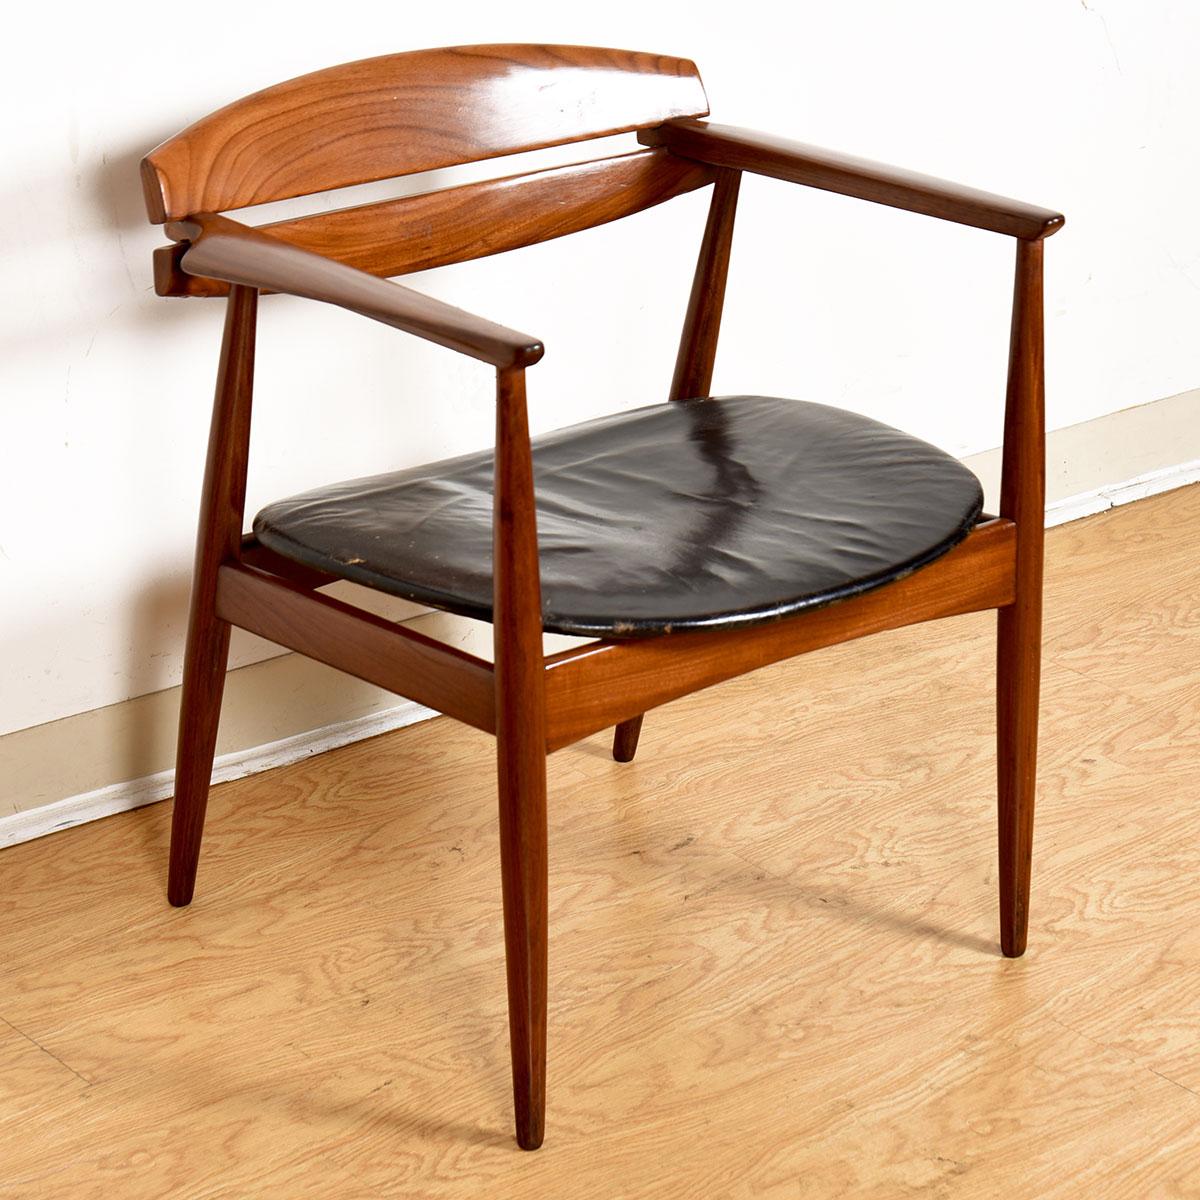 Rare Bramin Danish Modern Rosewood + Leather Armchair, 1959 In Good Condition For Sale In Kensington, MD